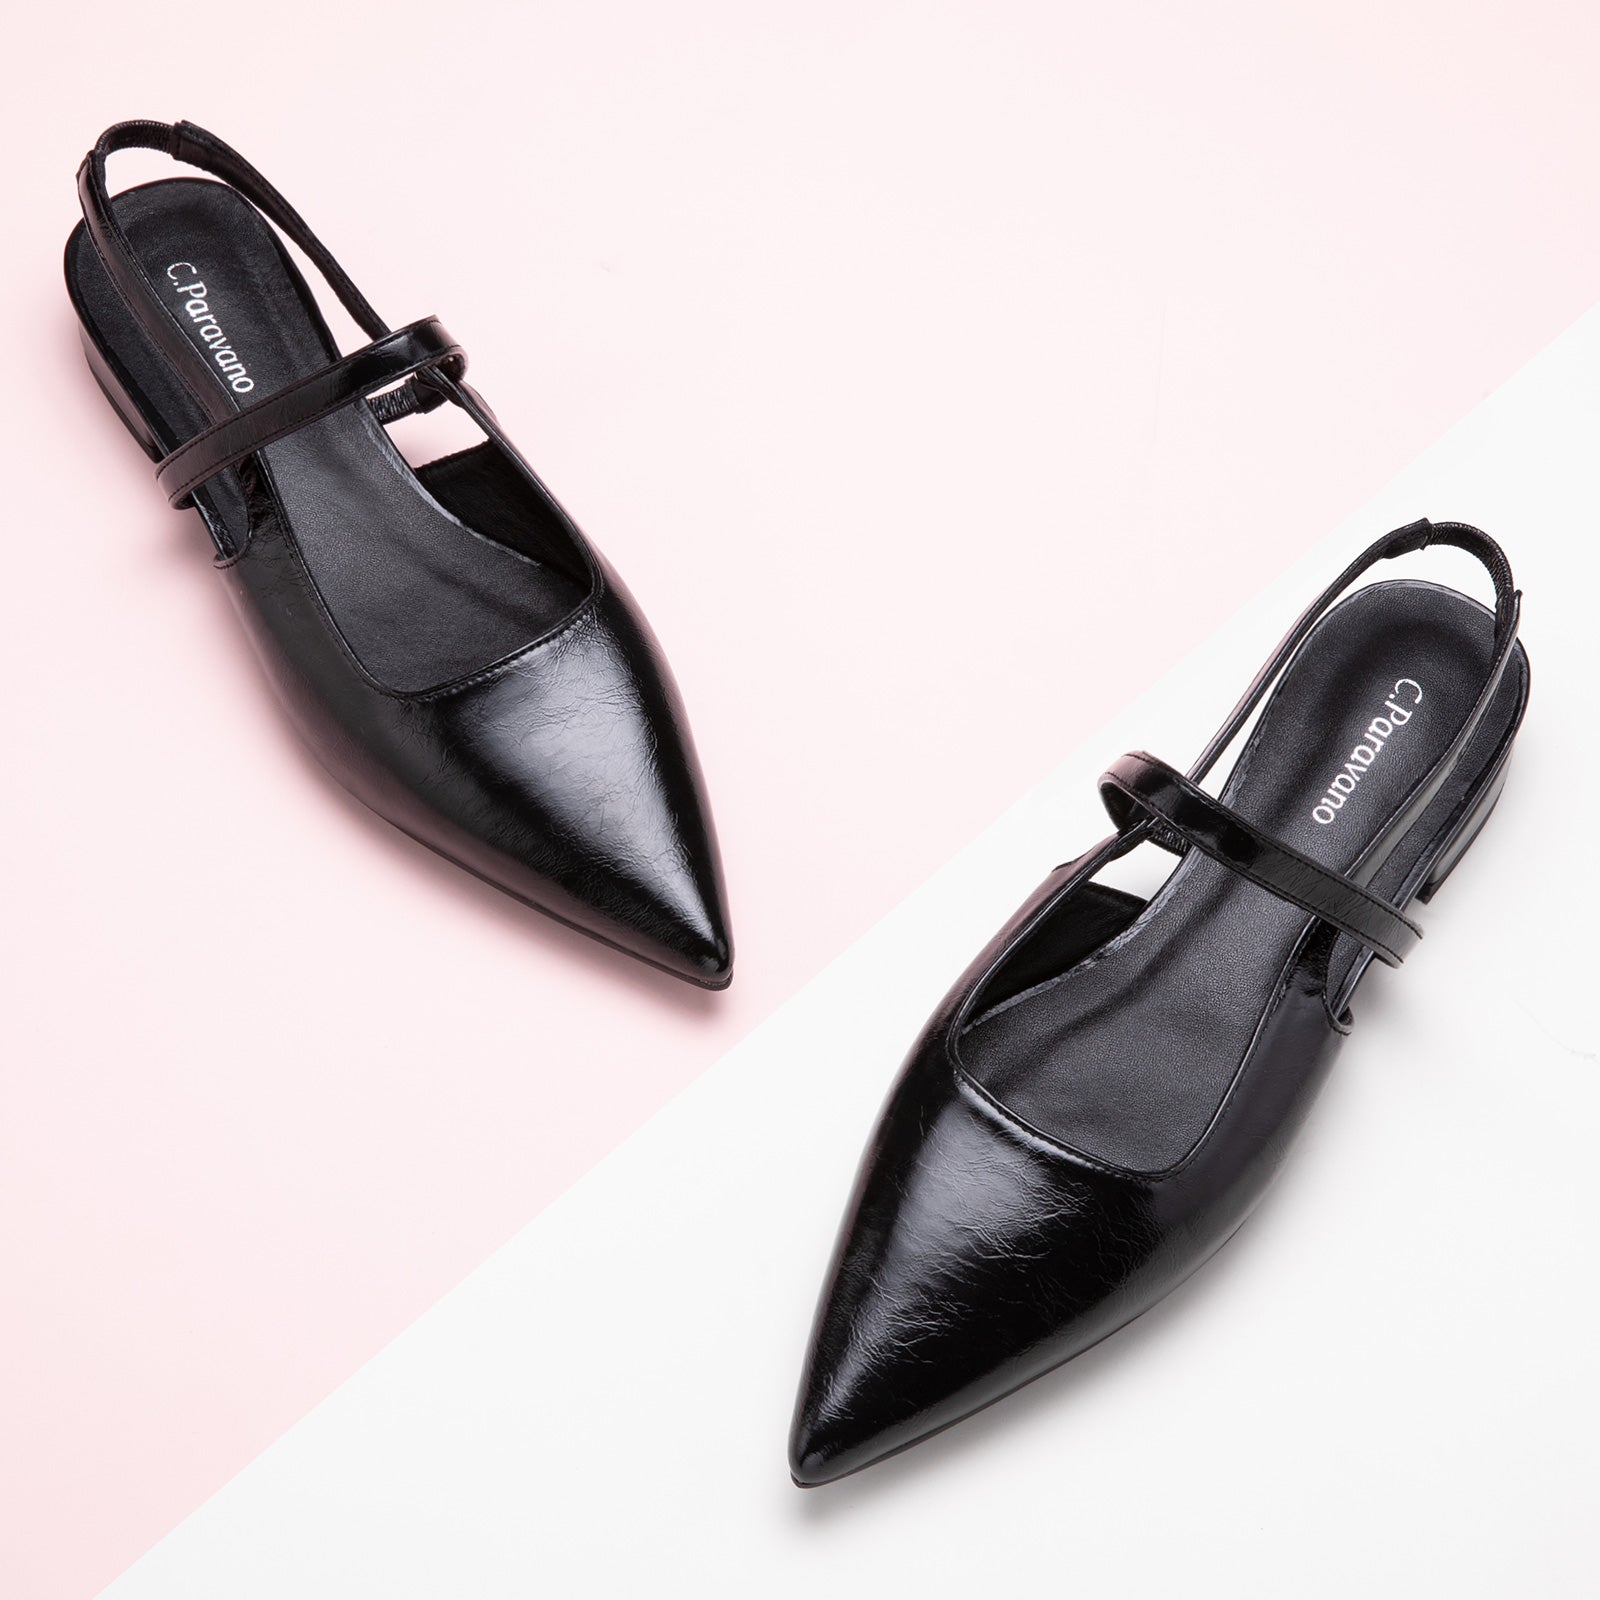  Black Pointed Toe Slingback Flats, perfect for a confident and fashionable look in any urban setting.